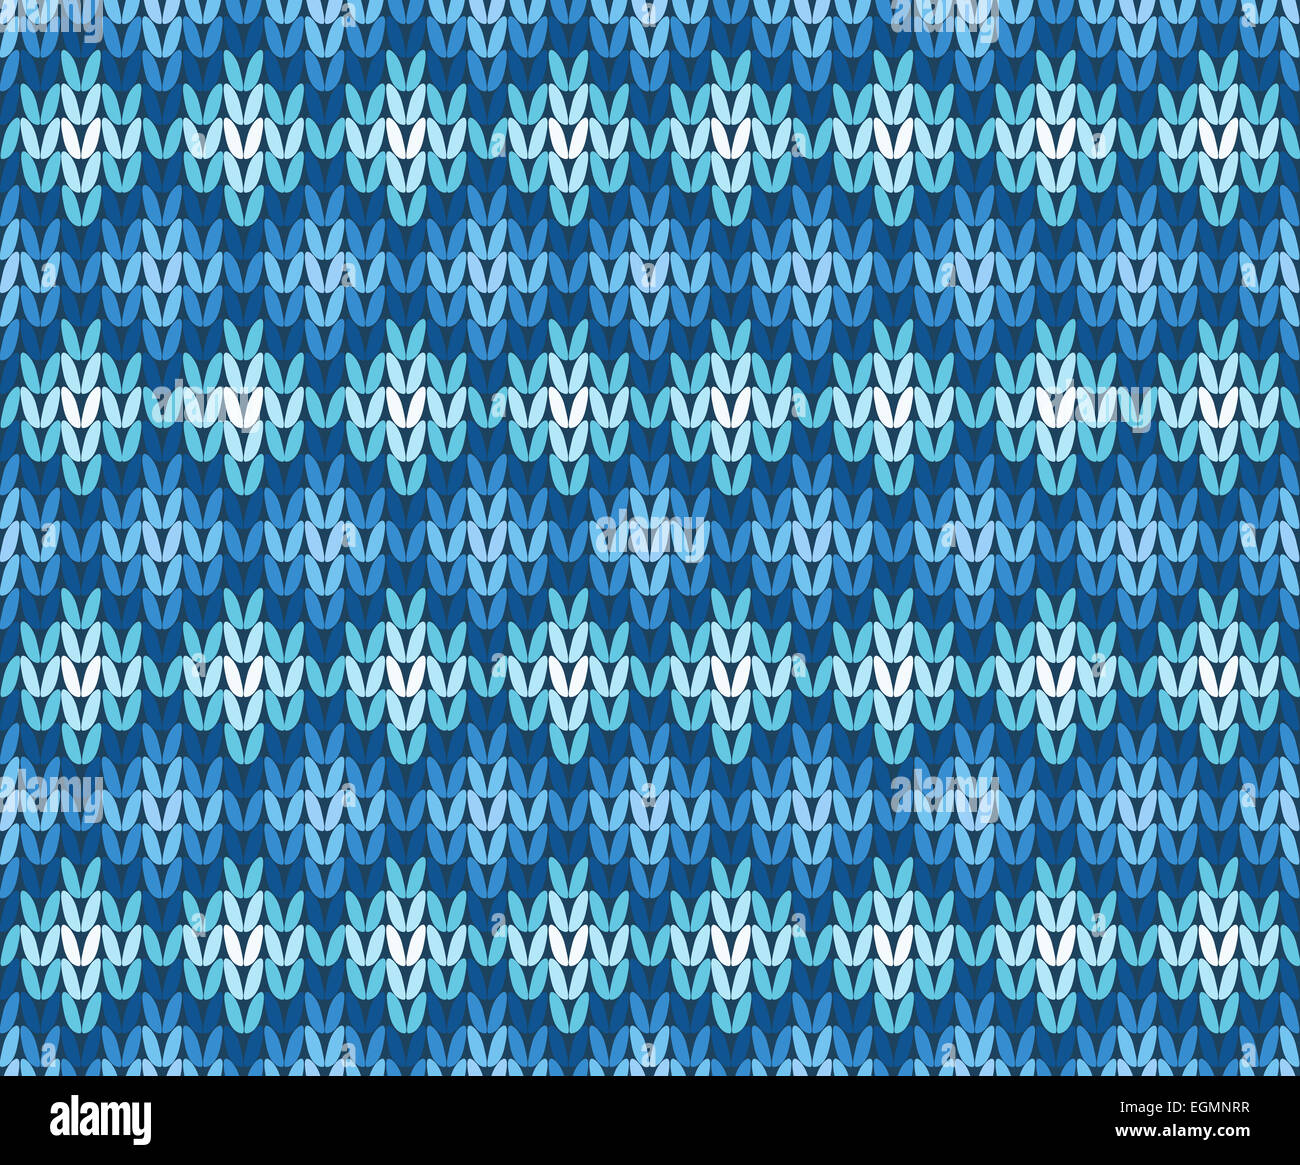 Blue and White Gradient Knitted Seamless Pattern from Abstract Geometric Rhombus Winter Ornament on Dark Background Stock Photo